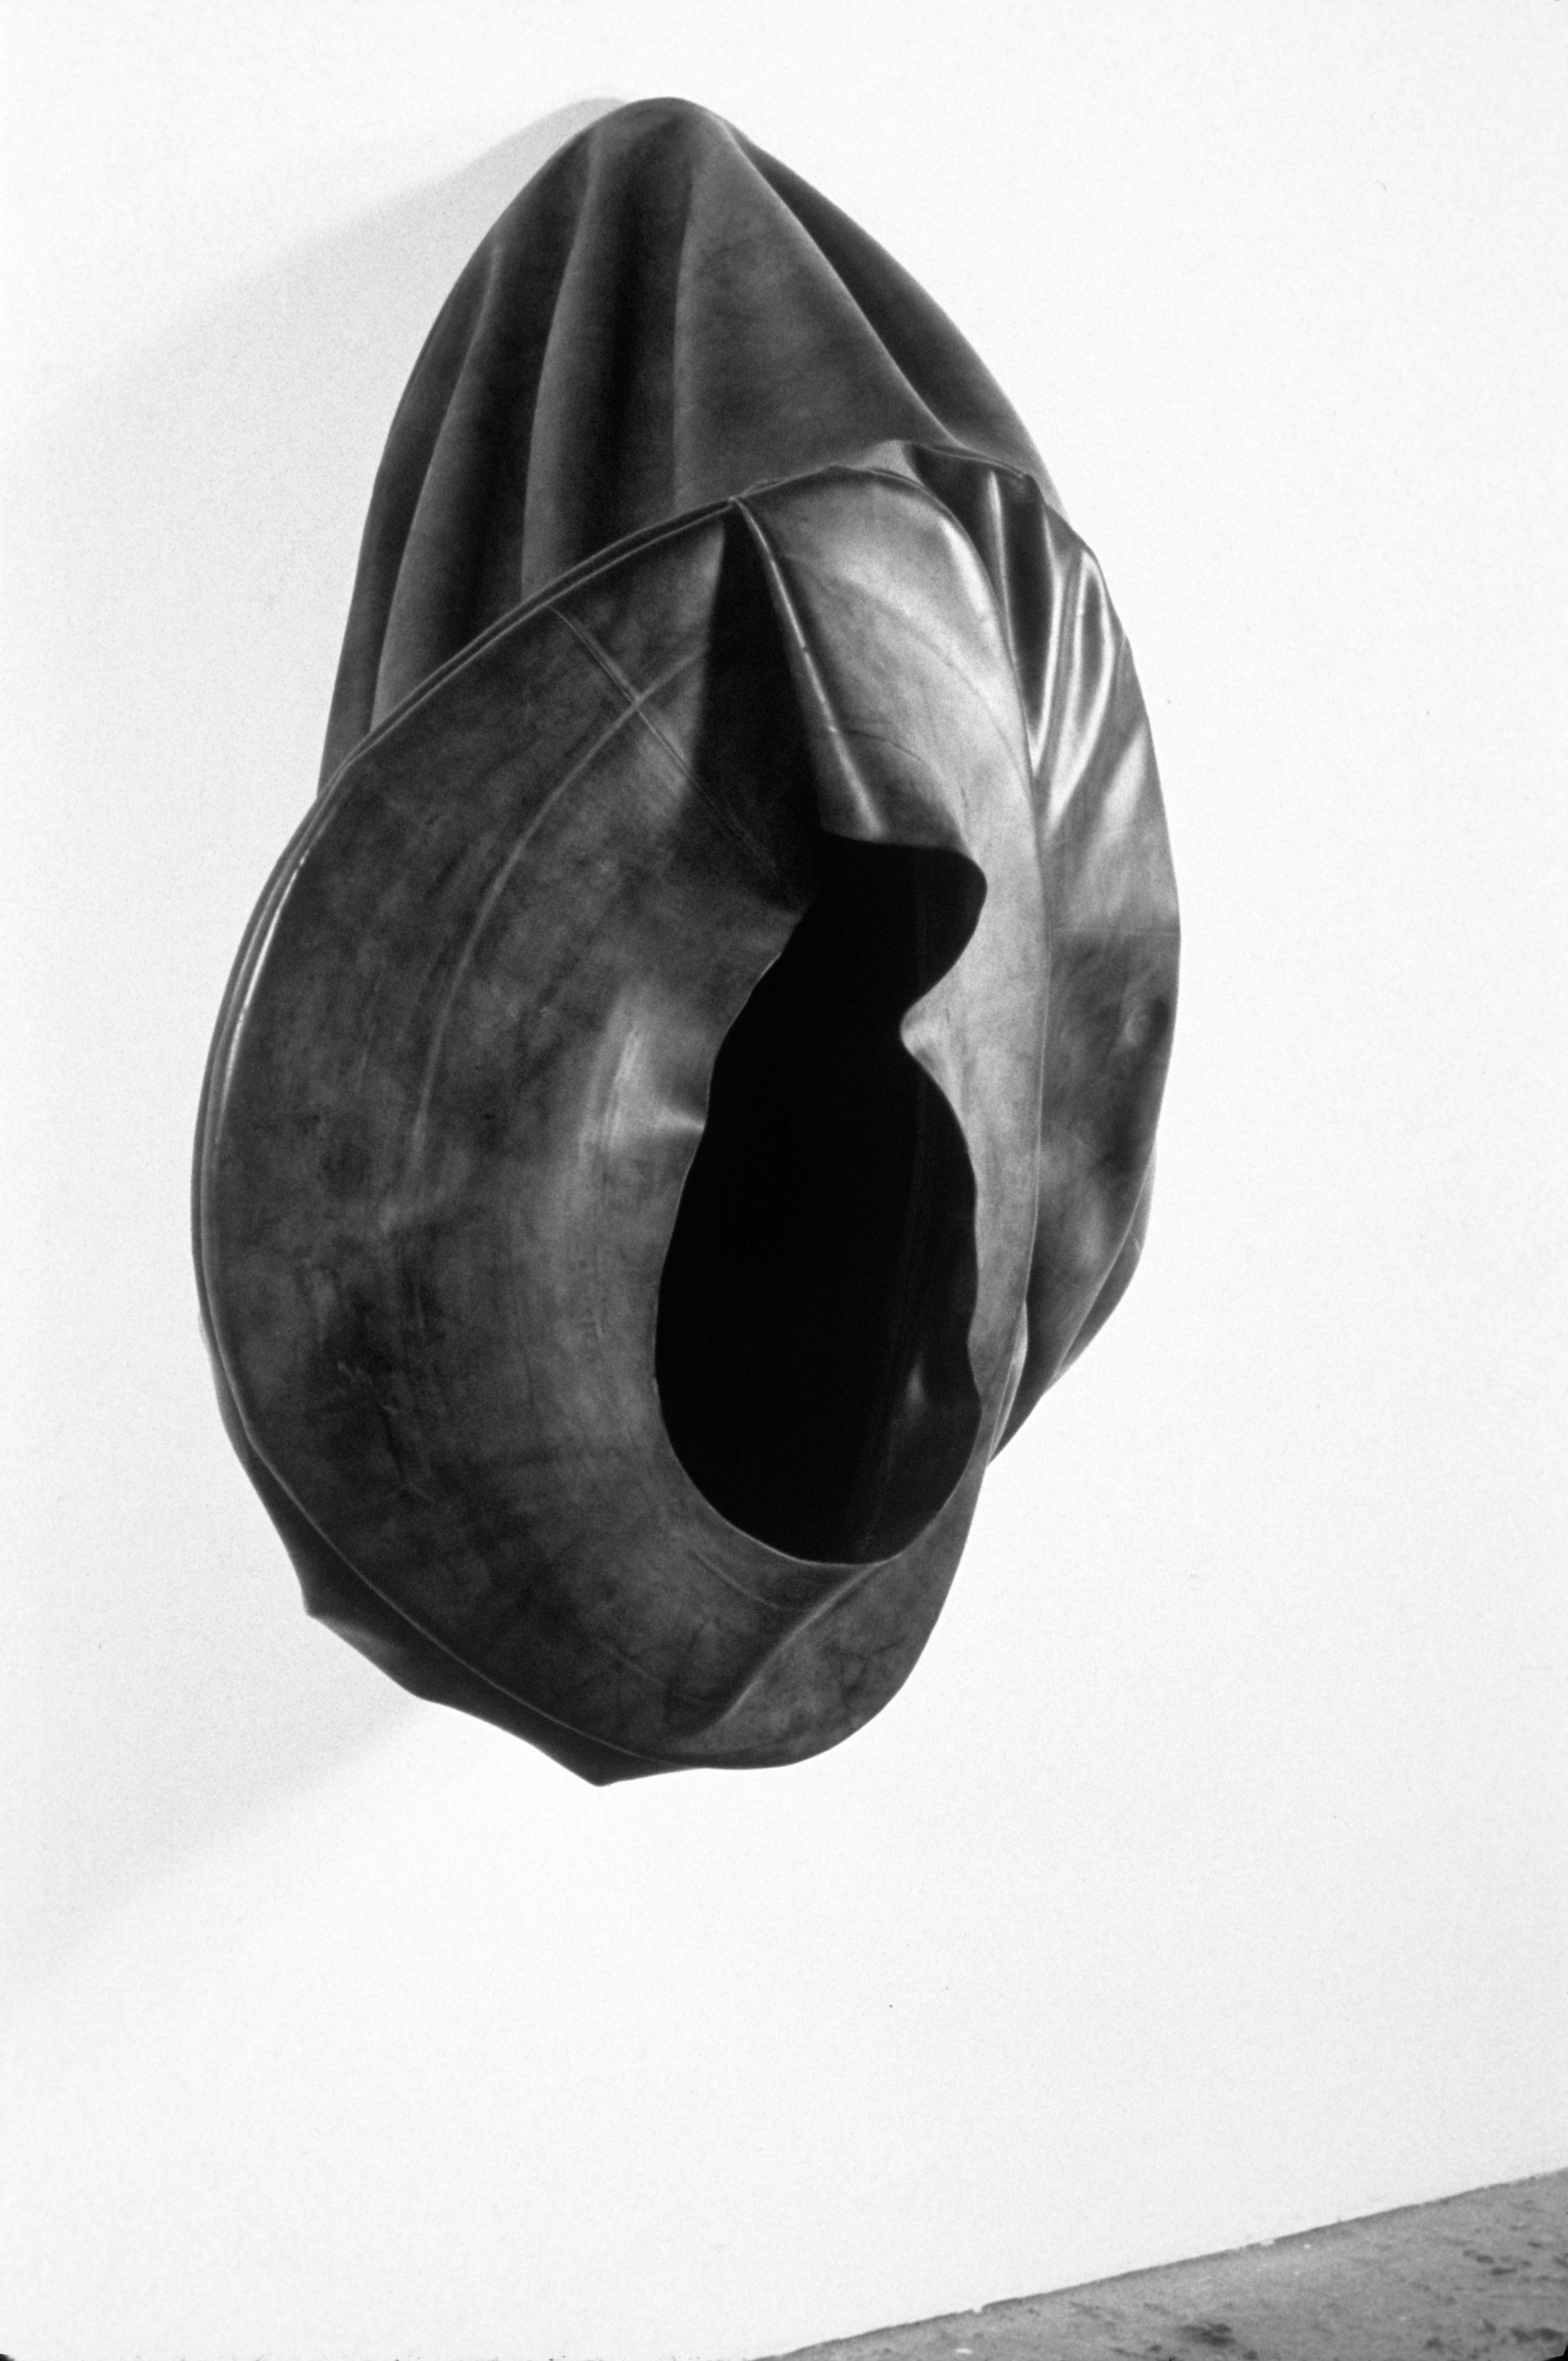   Black Hole   1988  rubber and wood  56 X 48 X 51"   